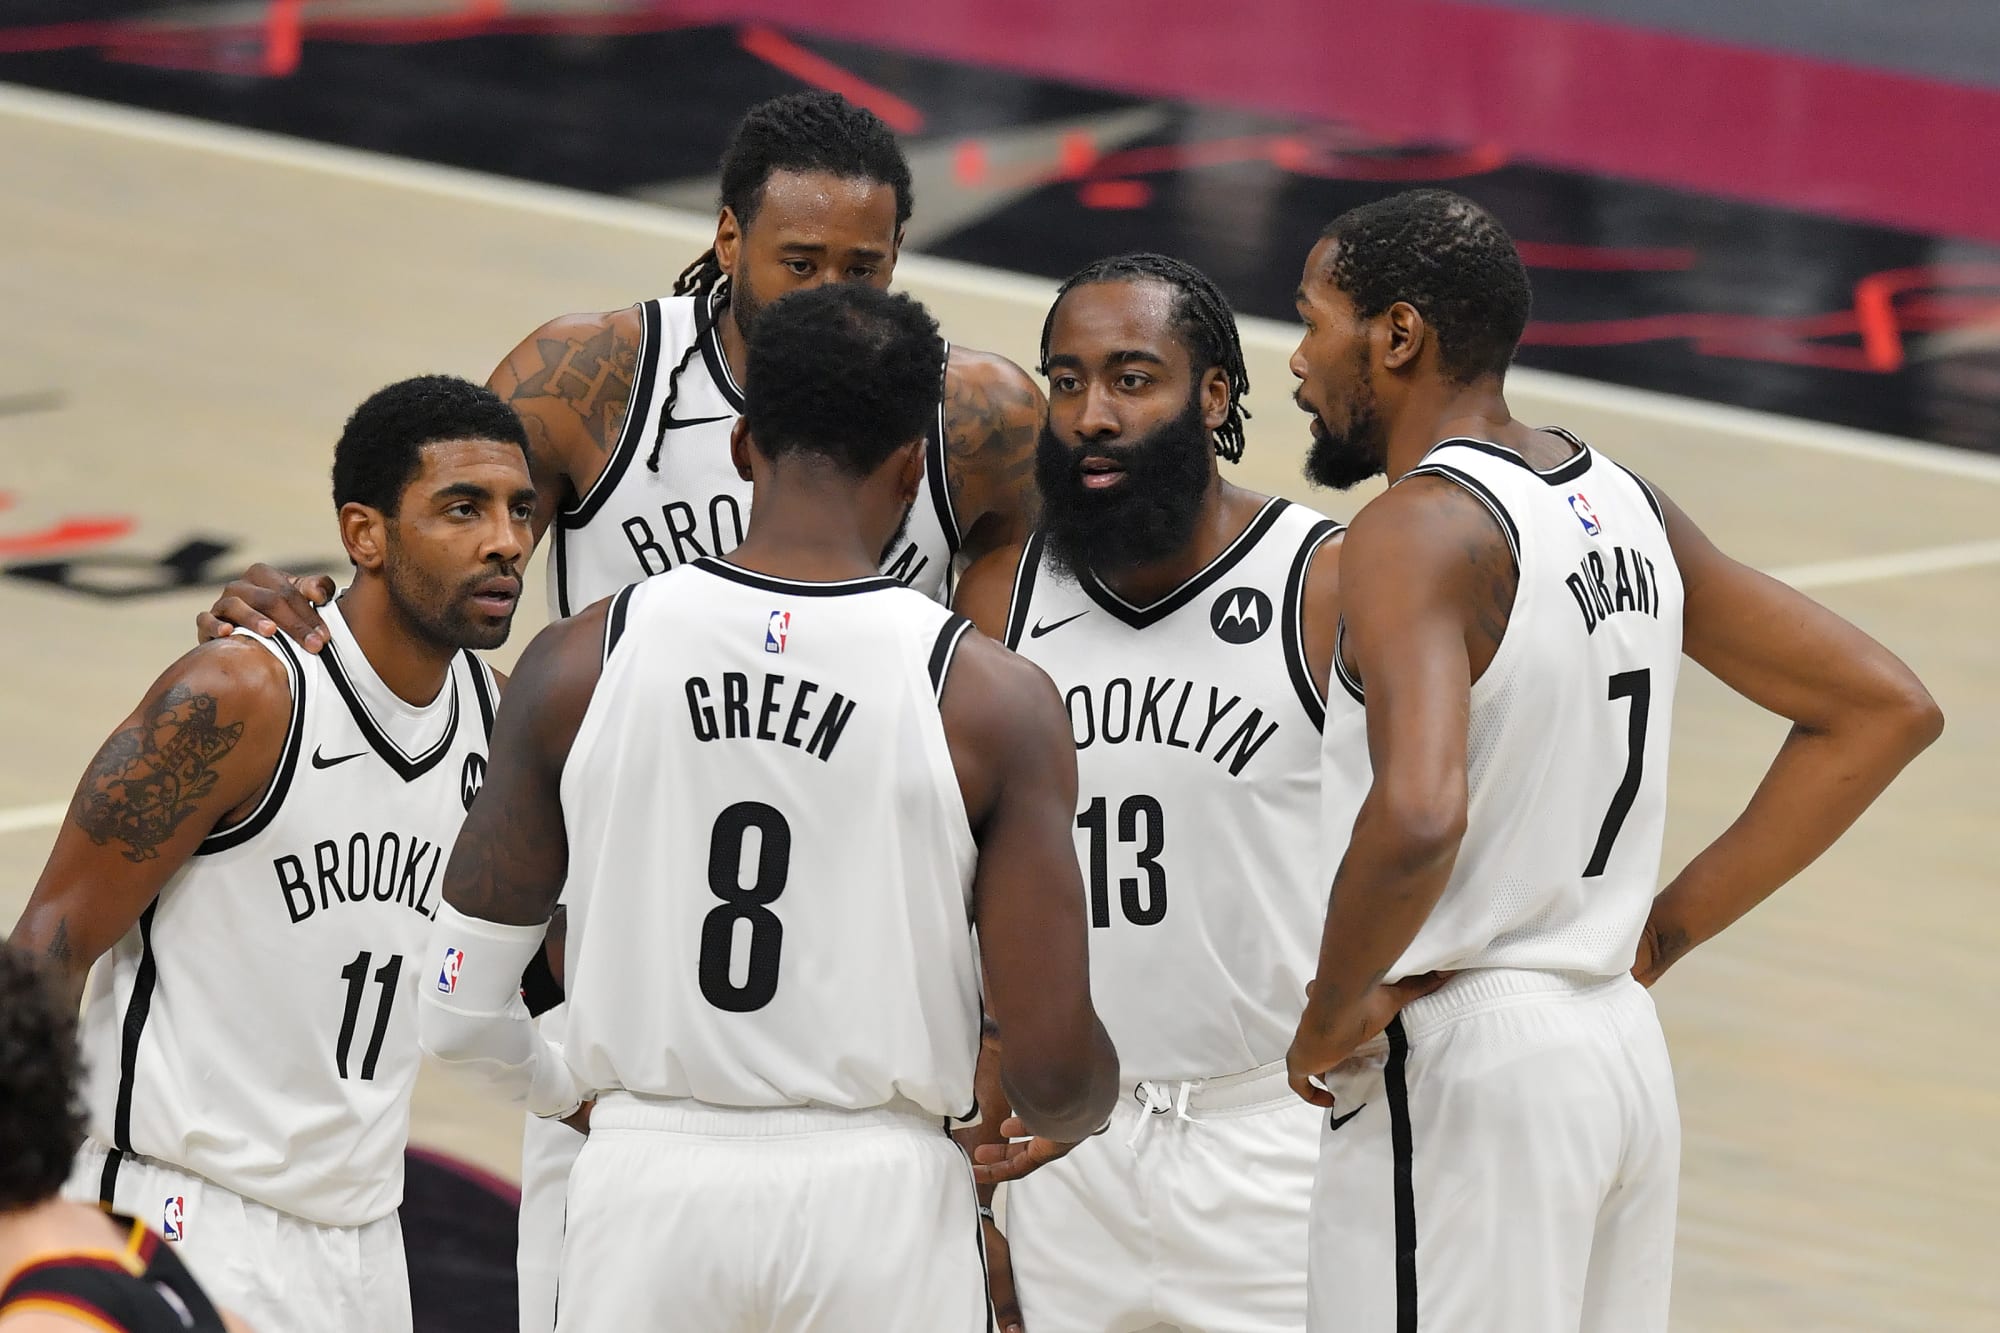 Brooklyn Nets How do Nets survive as NBA's most hated team?